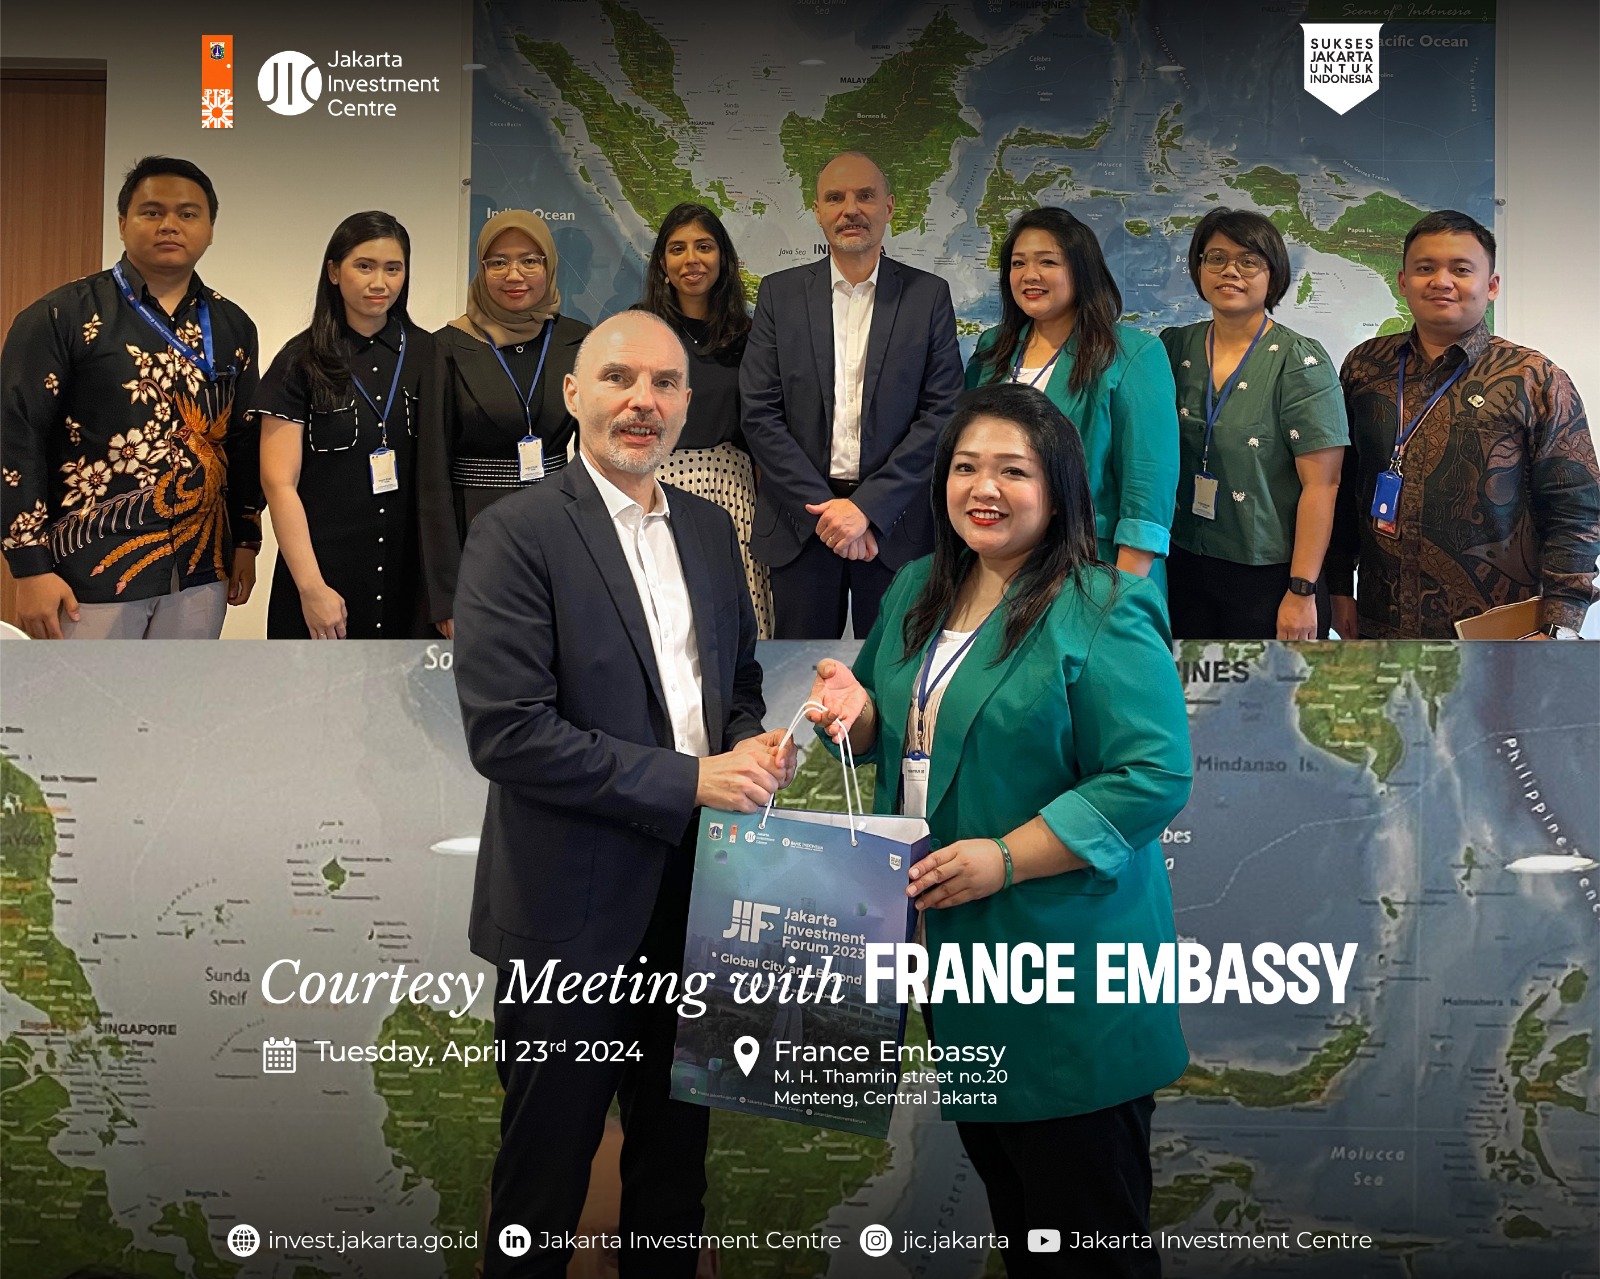 Courtesy Meeting with France Embassy